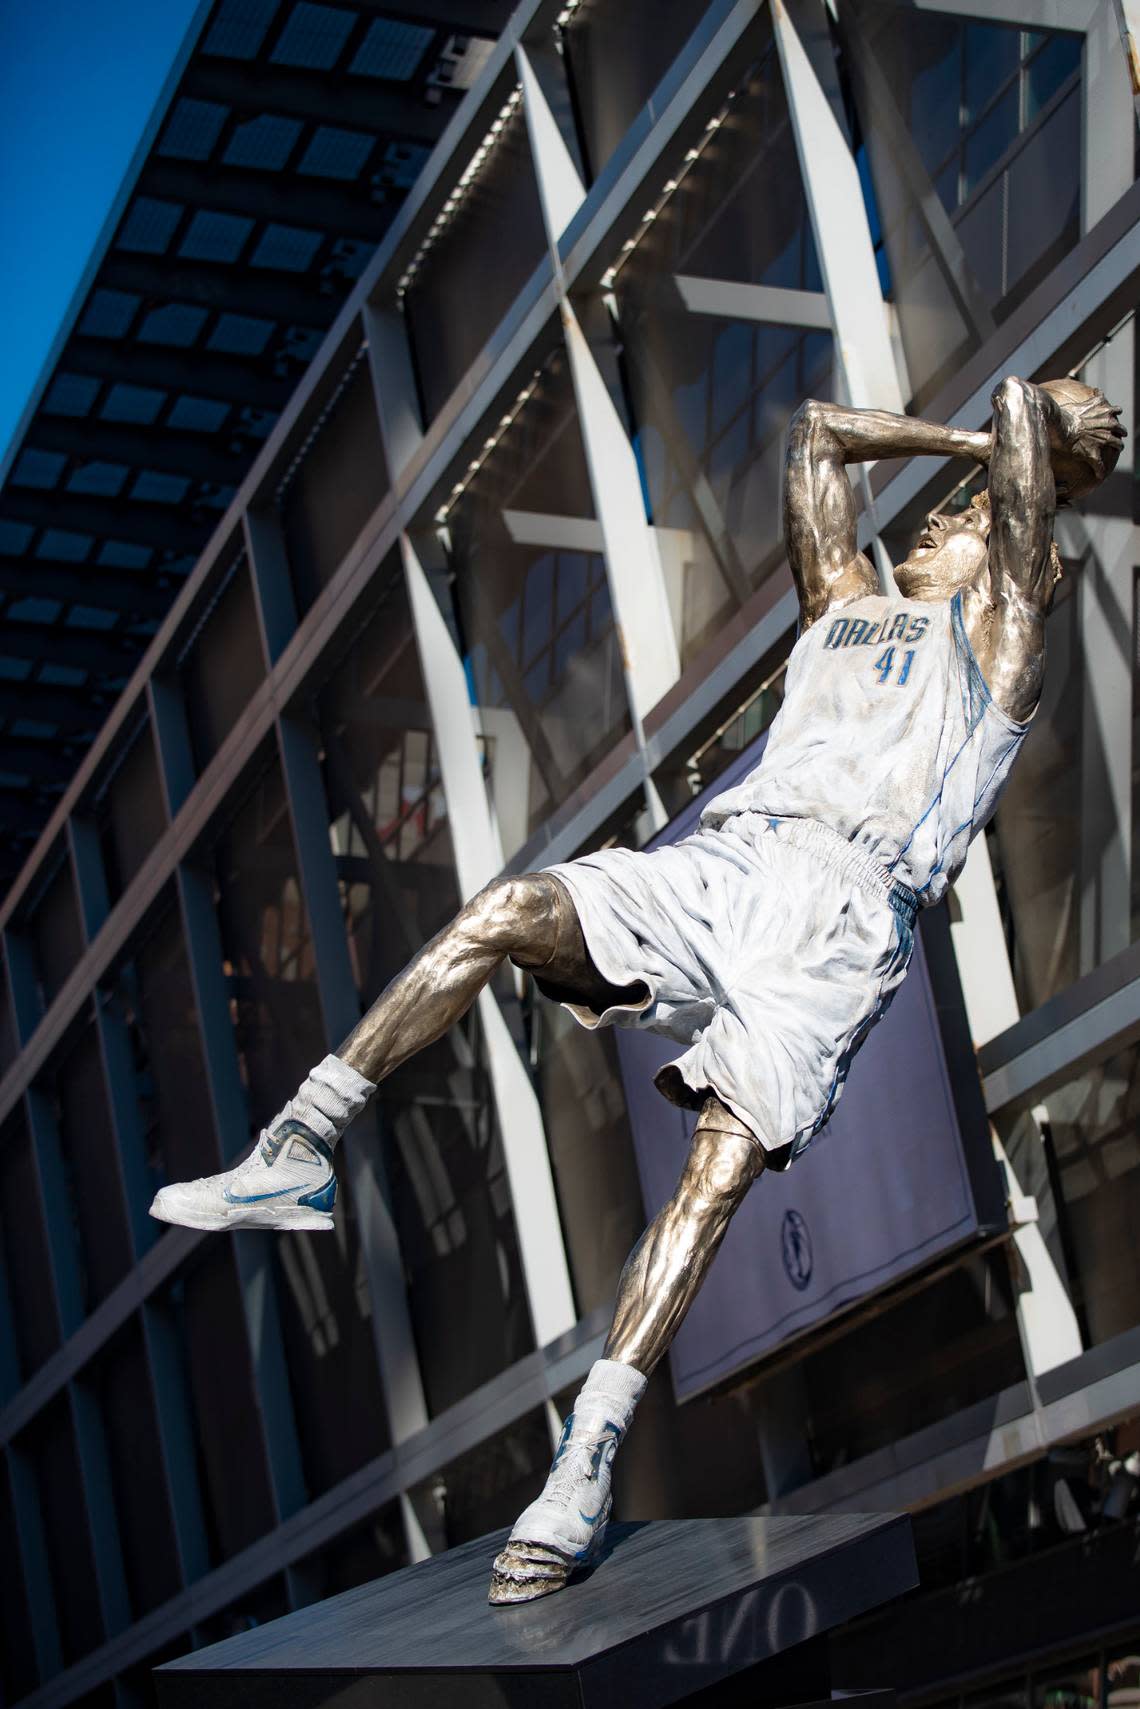 Dirk Nowitzki’s statue is unveiled during the “All Four One” statue ceremony in front of the American Airlines Center in Dallas, Sunday, Dec. 25, 2022. (AP Photo/Emil T. Lippe)